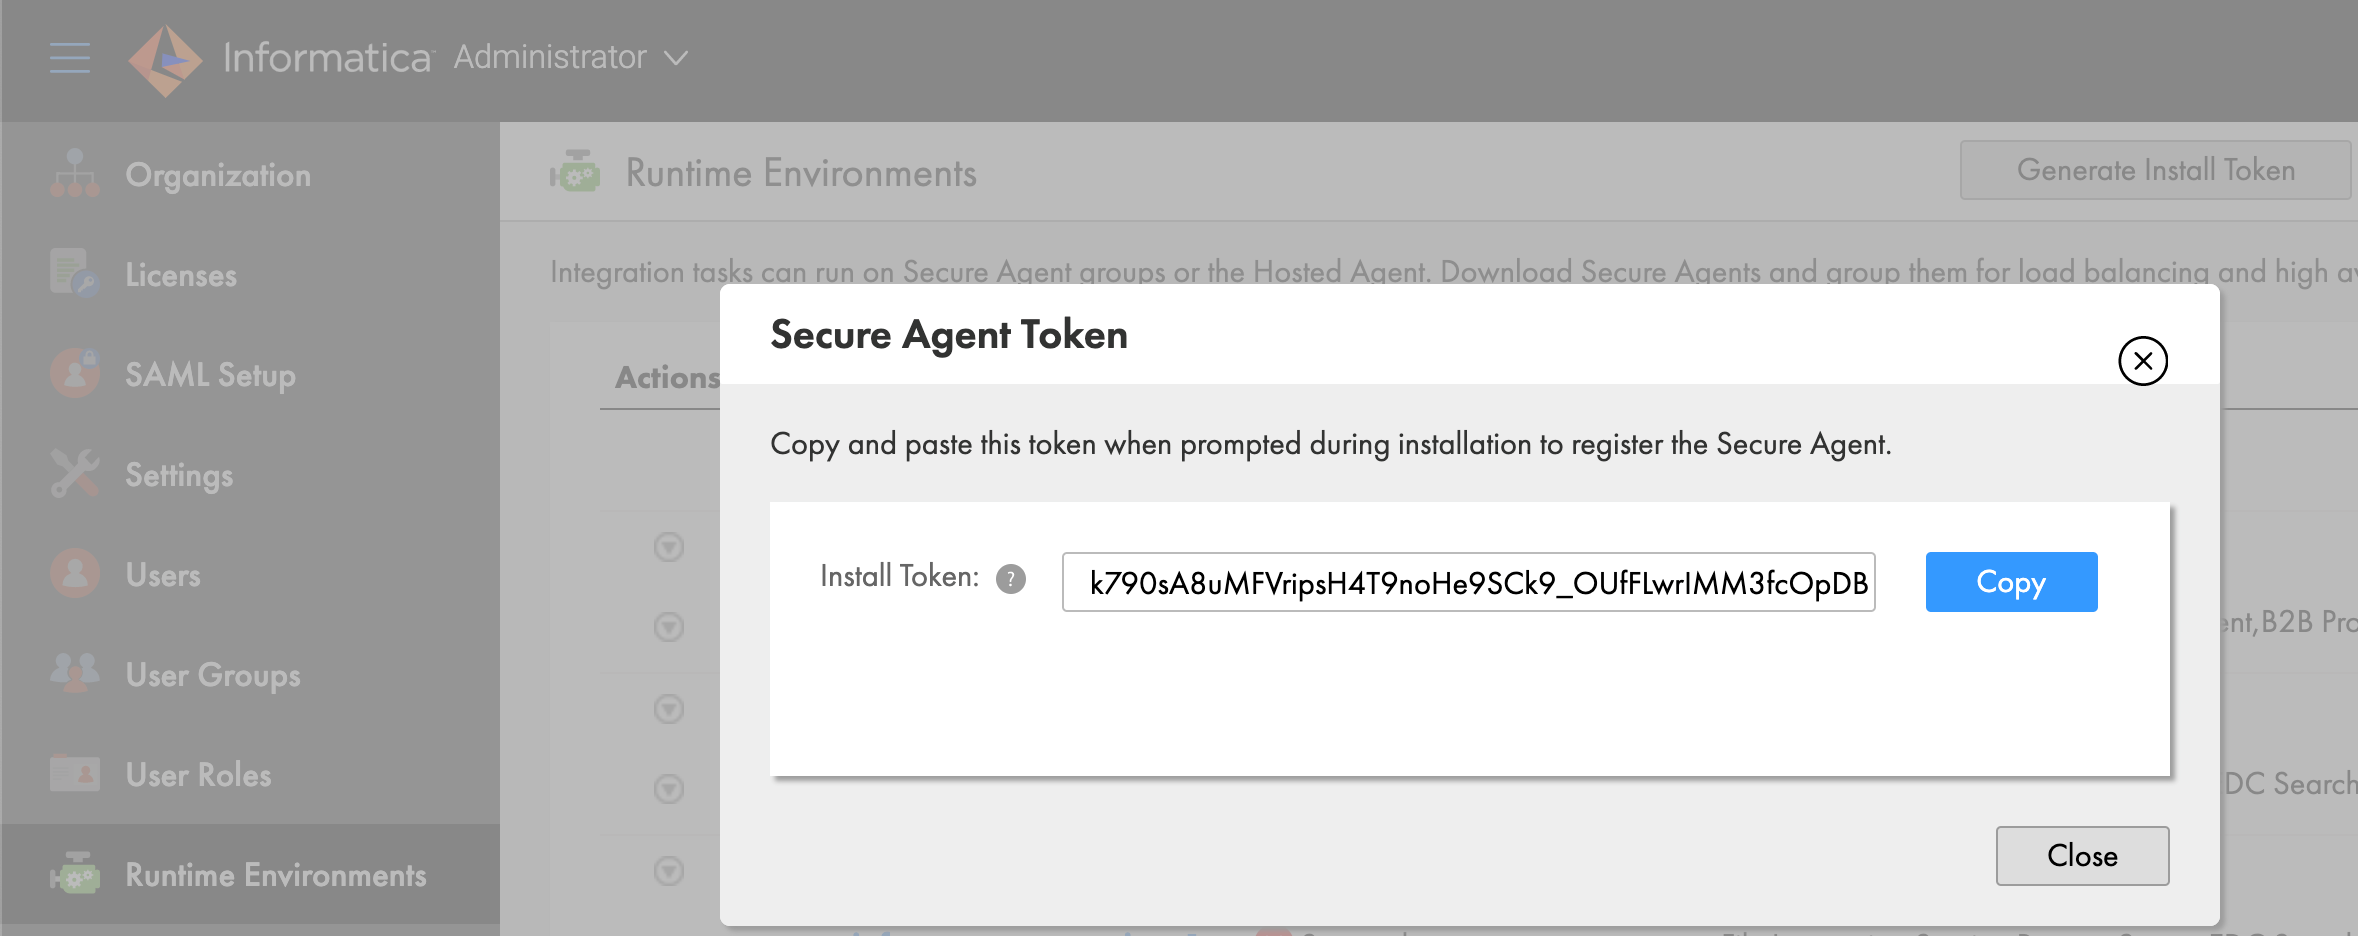 The Secure Agent Token dialog box contains the install token, which is a long string of characters. The Copy button appears to the right of the install token. 
						